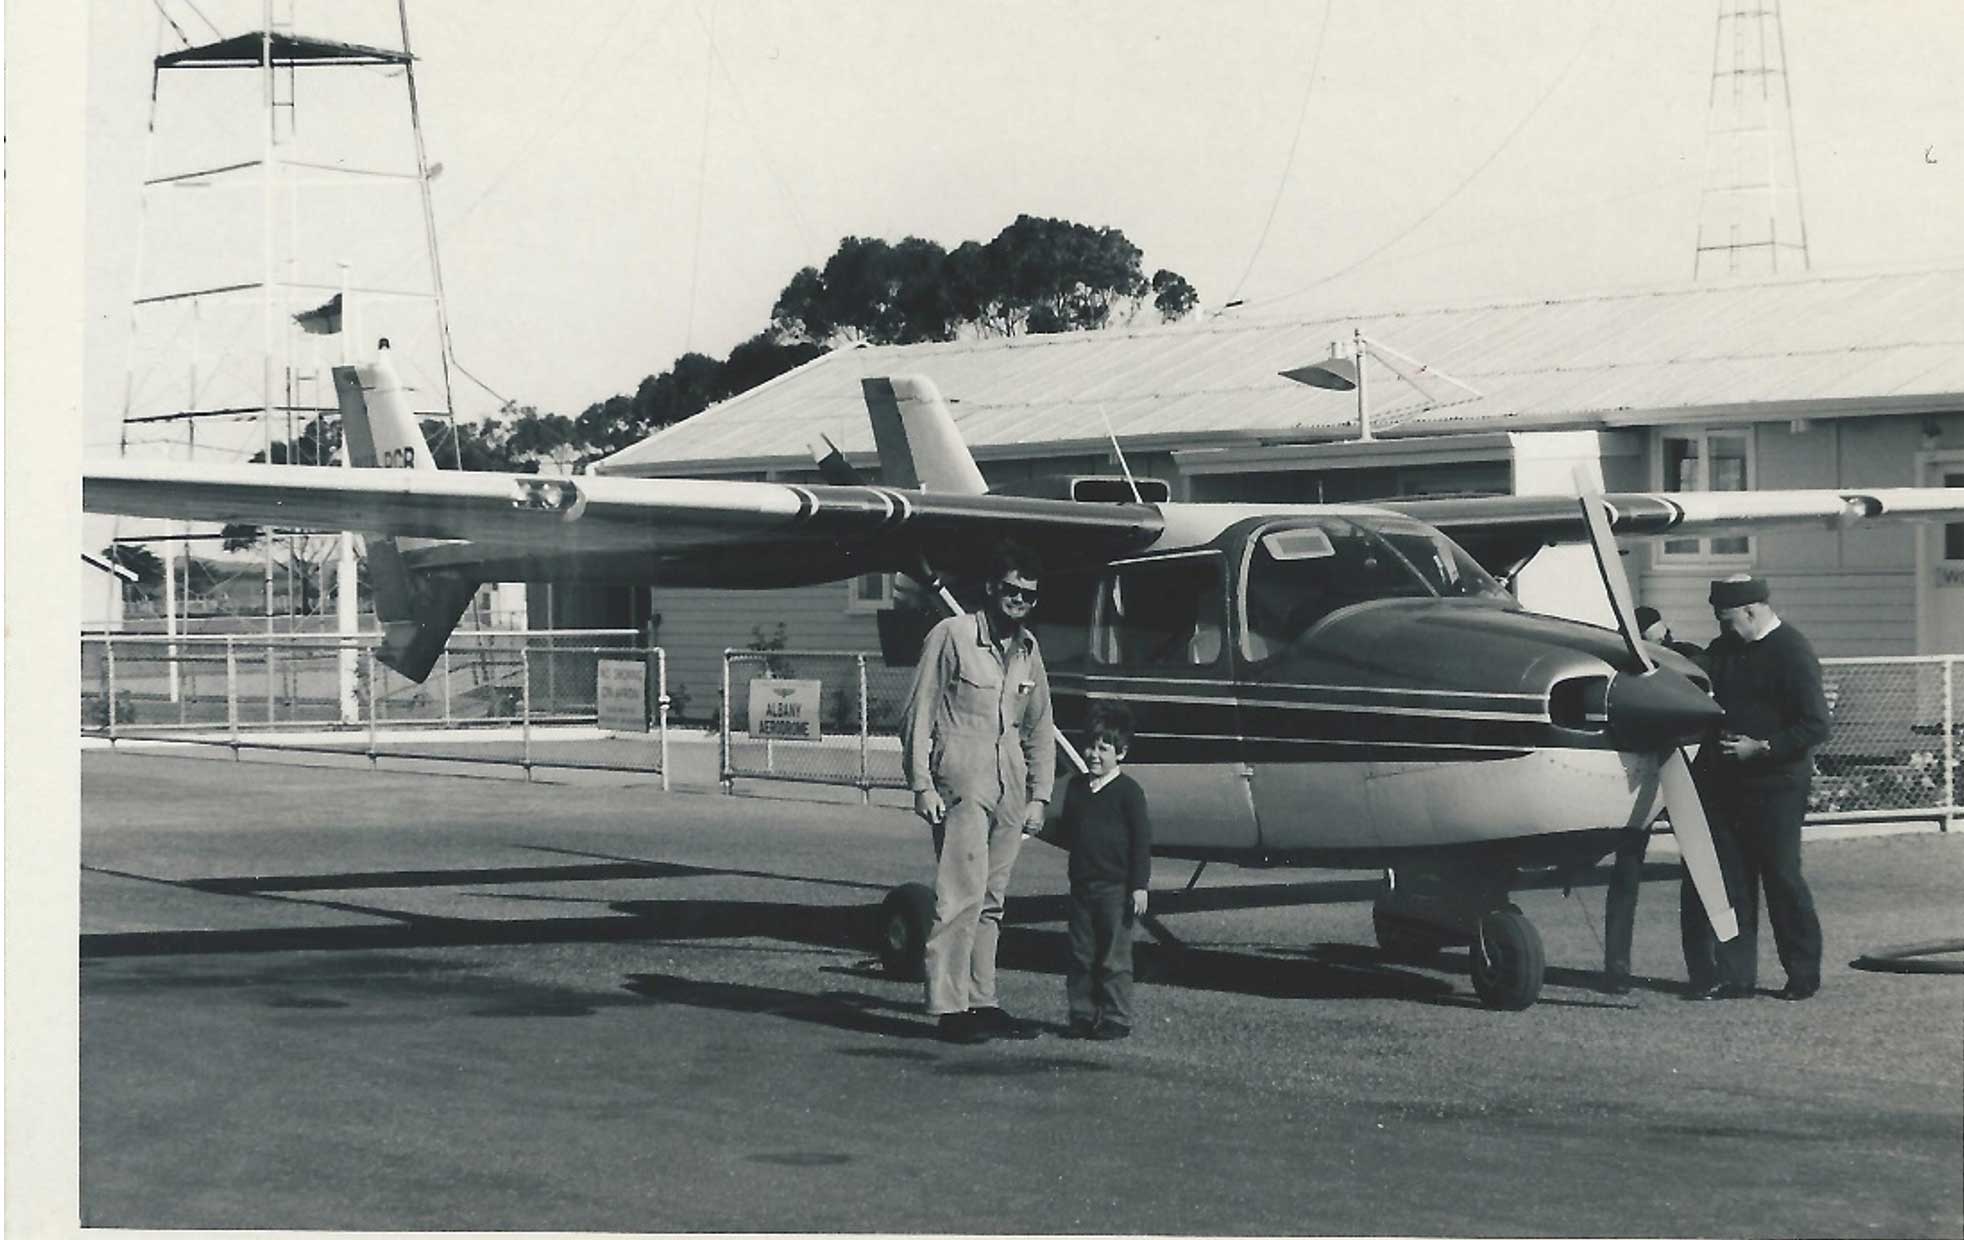 Ray Robertson And Son Malcom With Cheynes Beach Whaling Stations Whale Spotting Plane